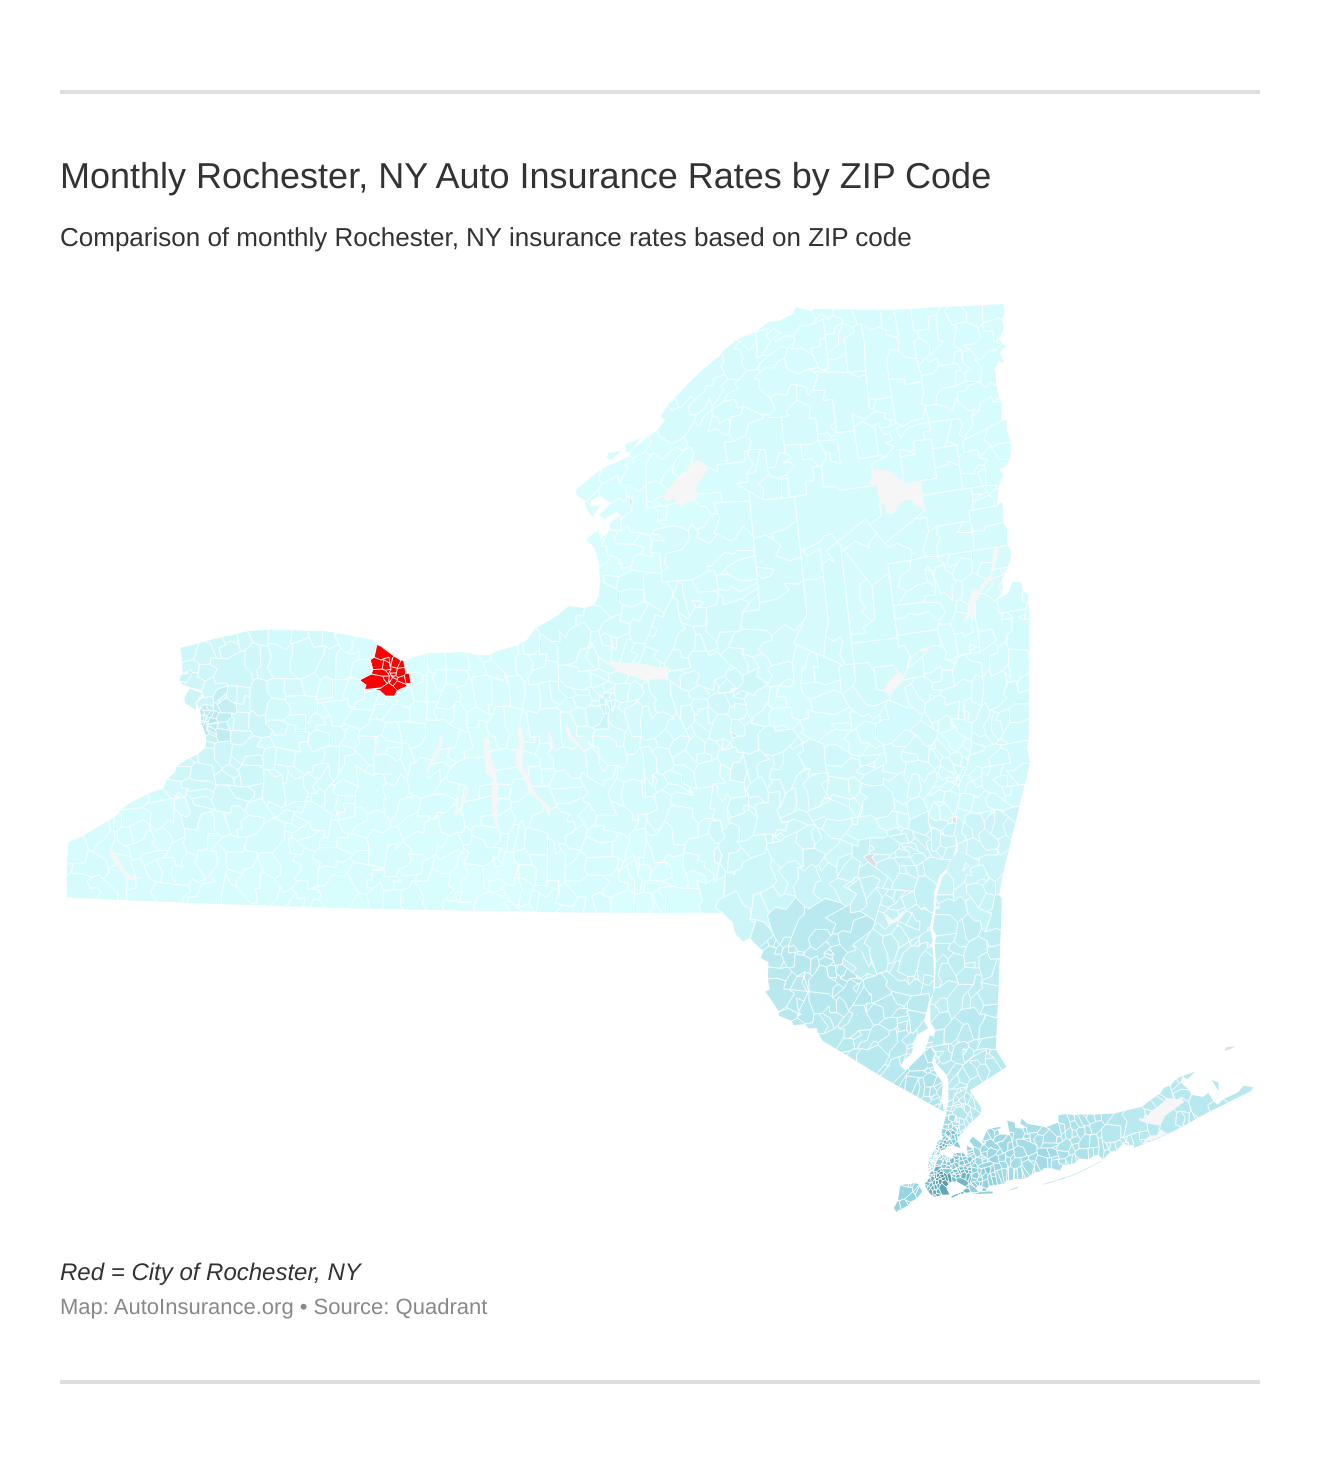 Monthly Rochester, NY Auto Insurance Rates by ZIP Code